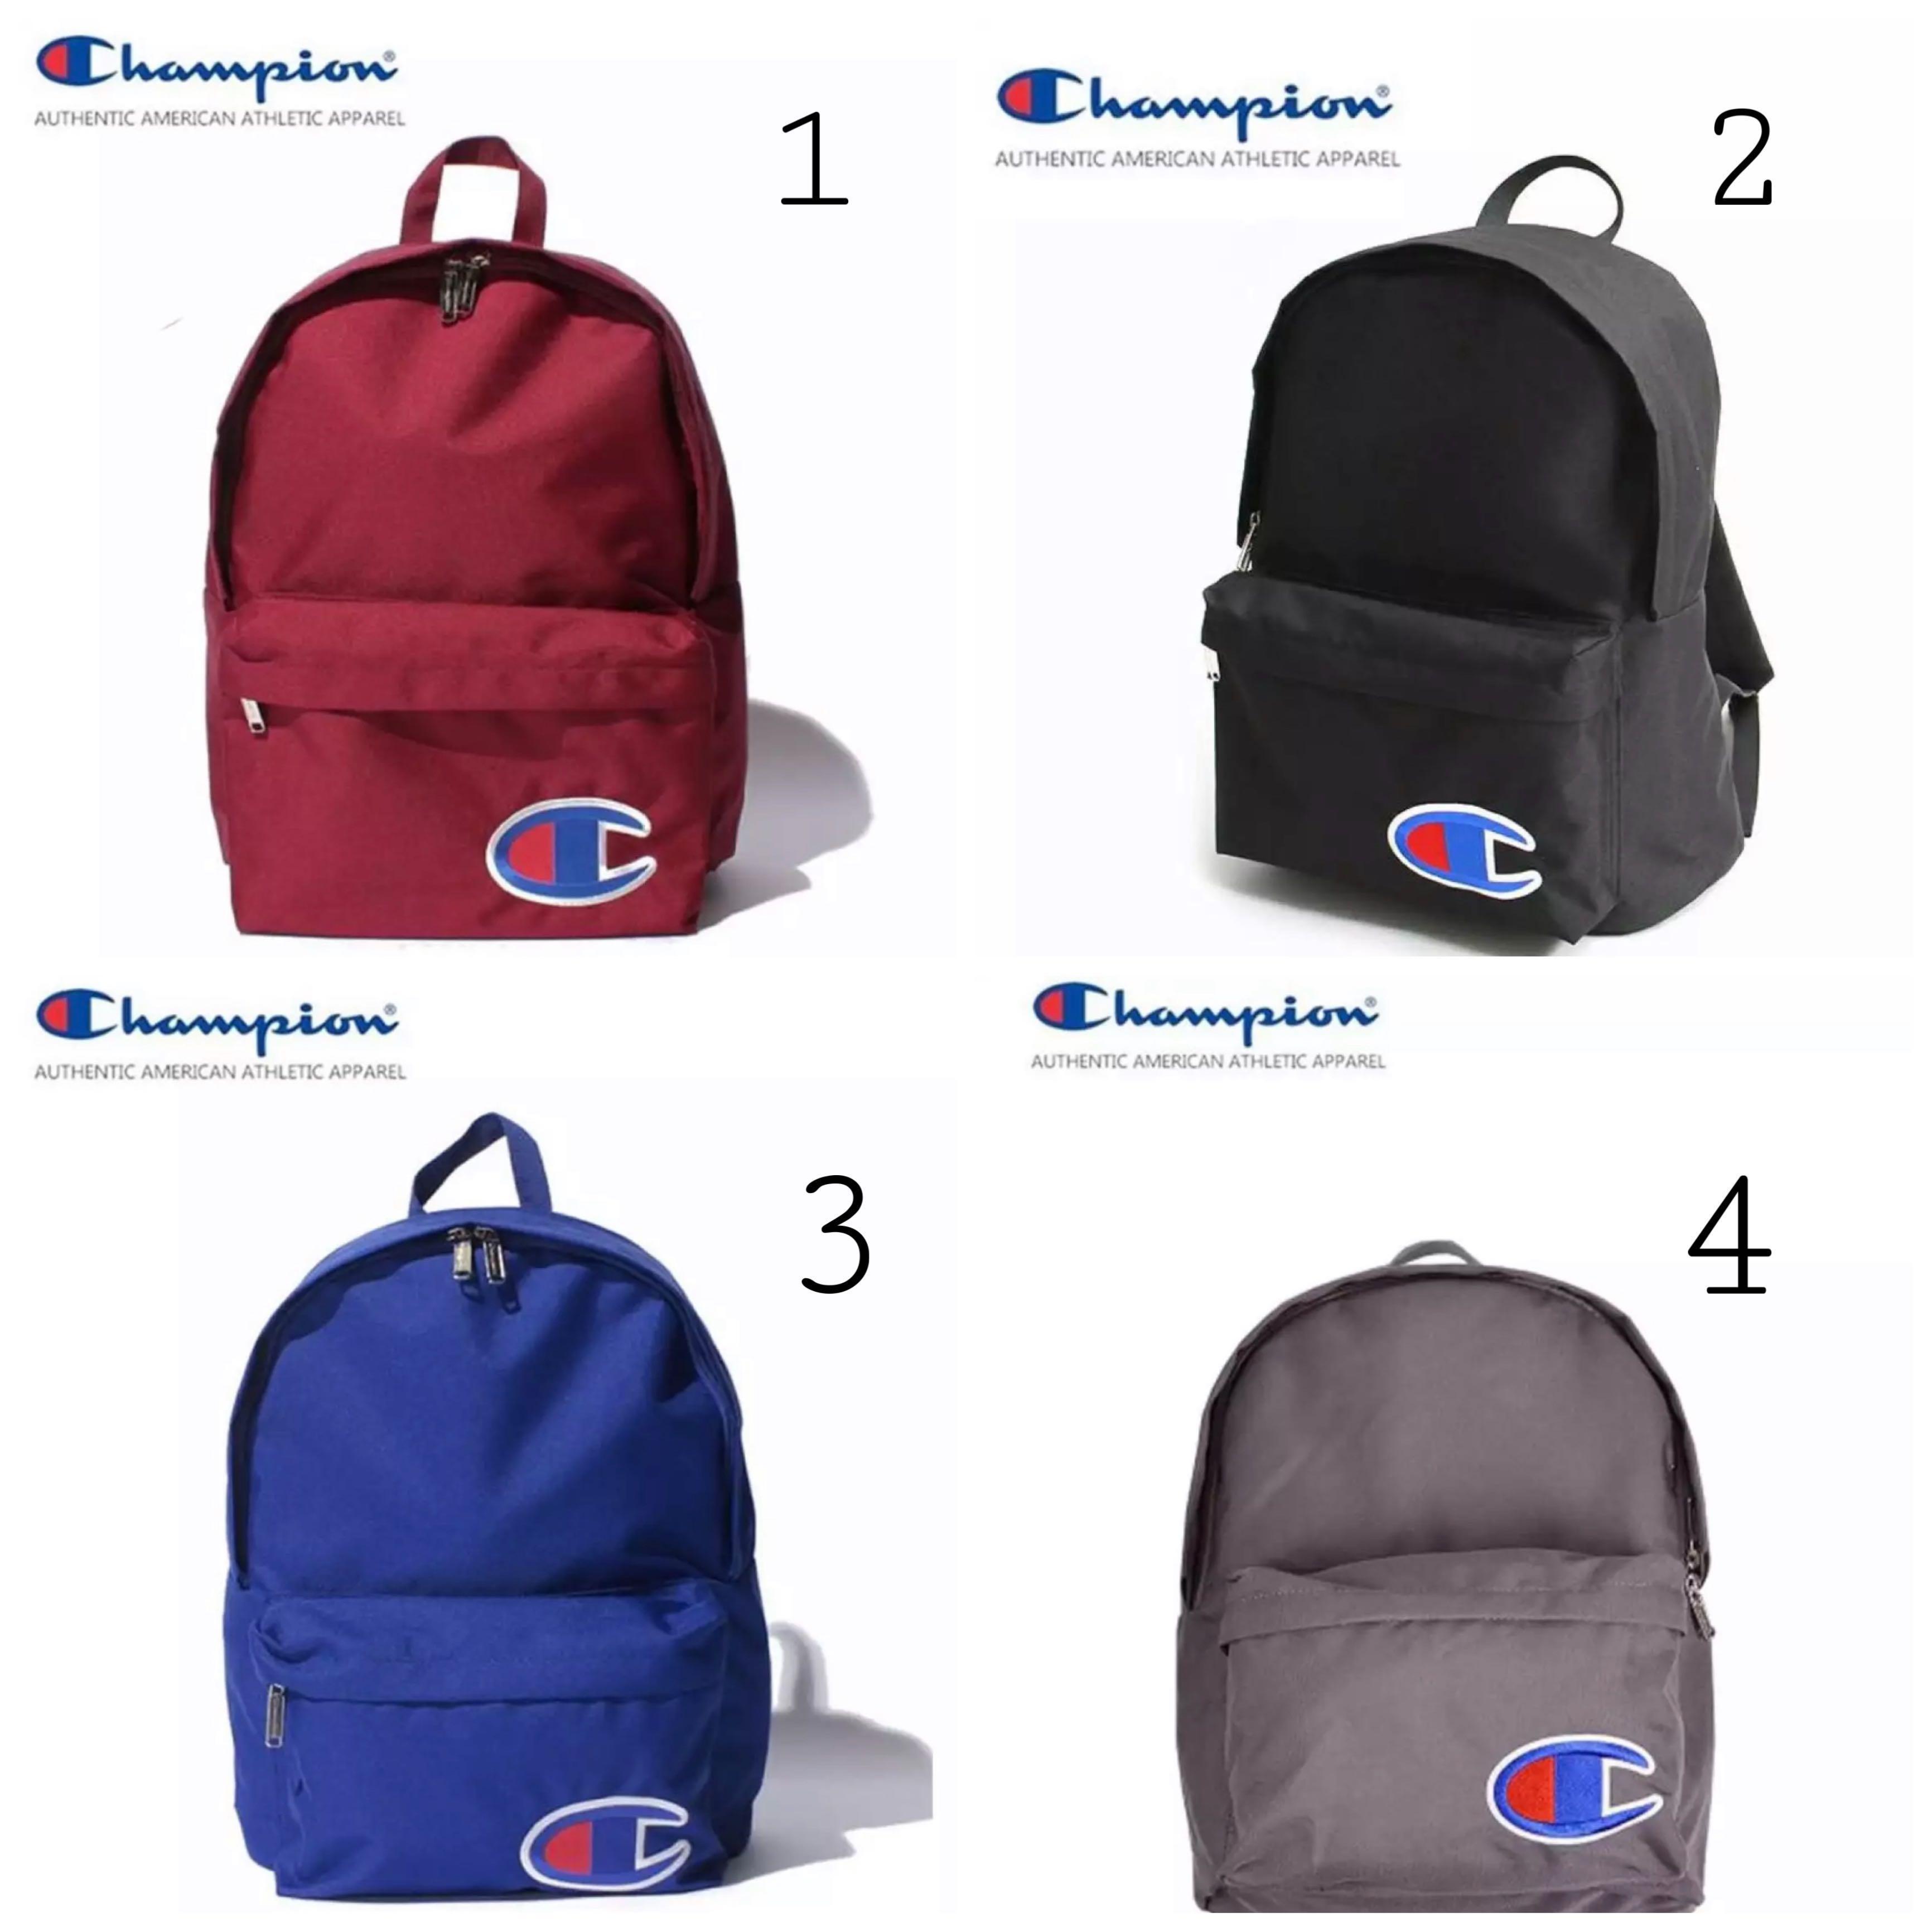 Champion Backpack *Authentic*, Women's 